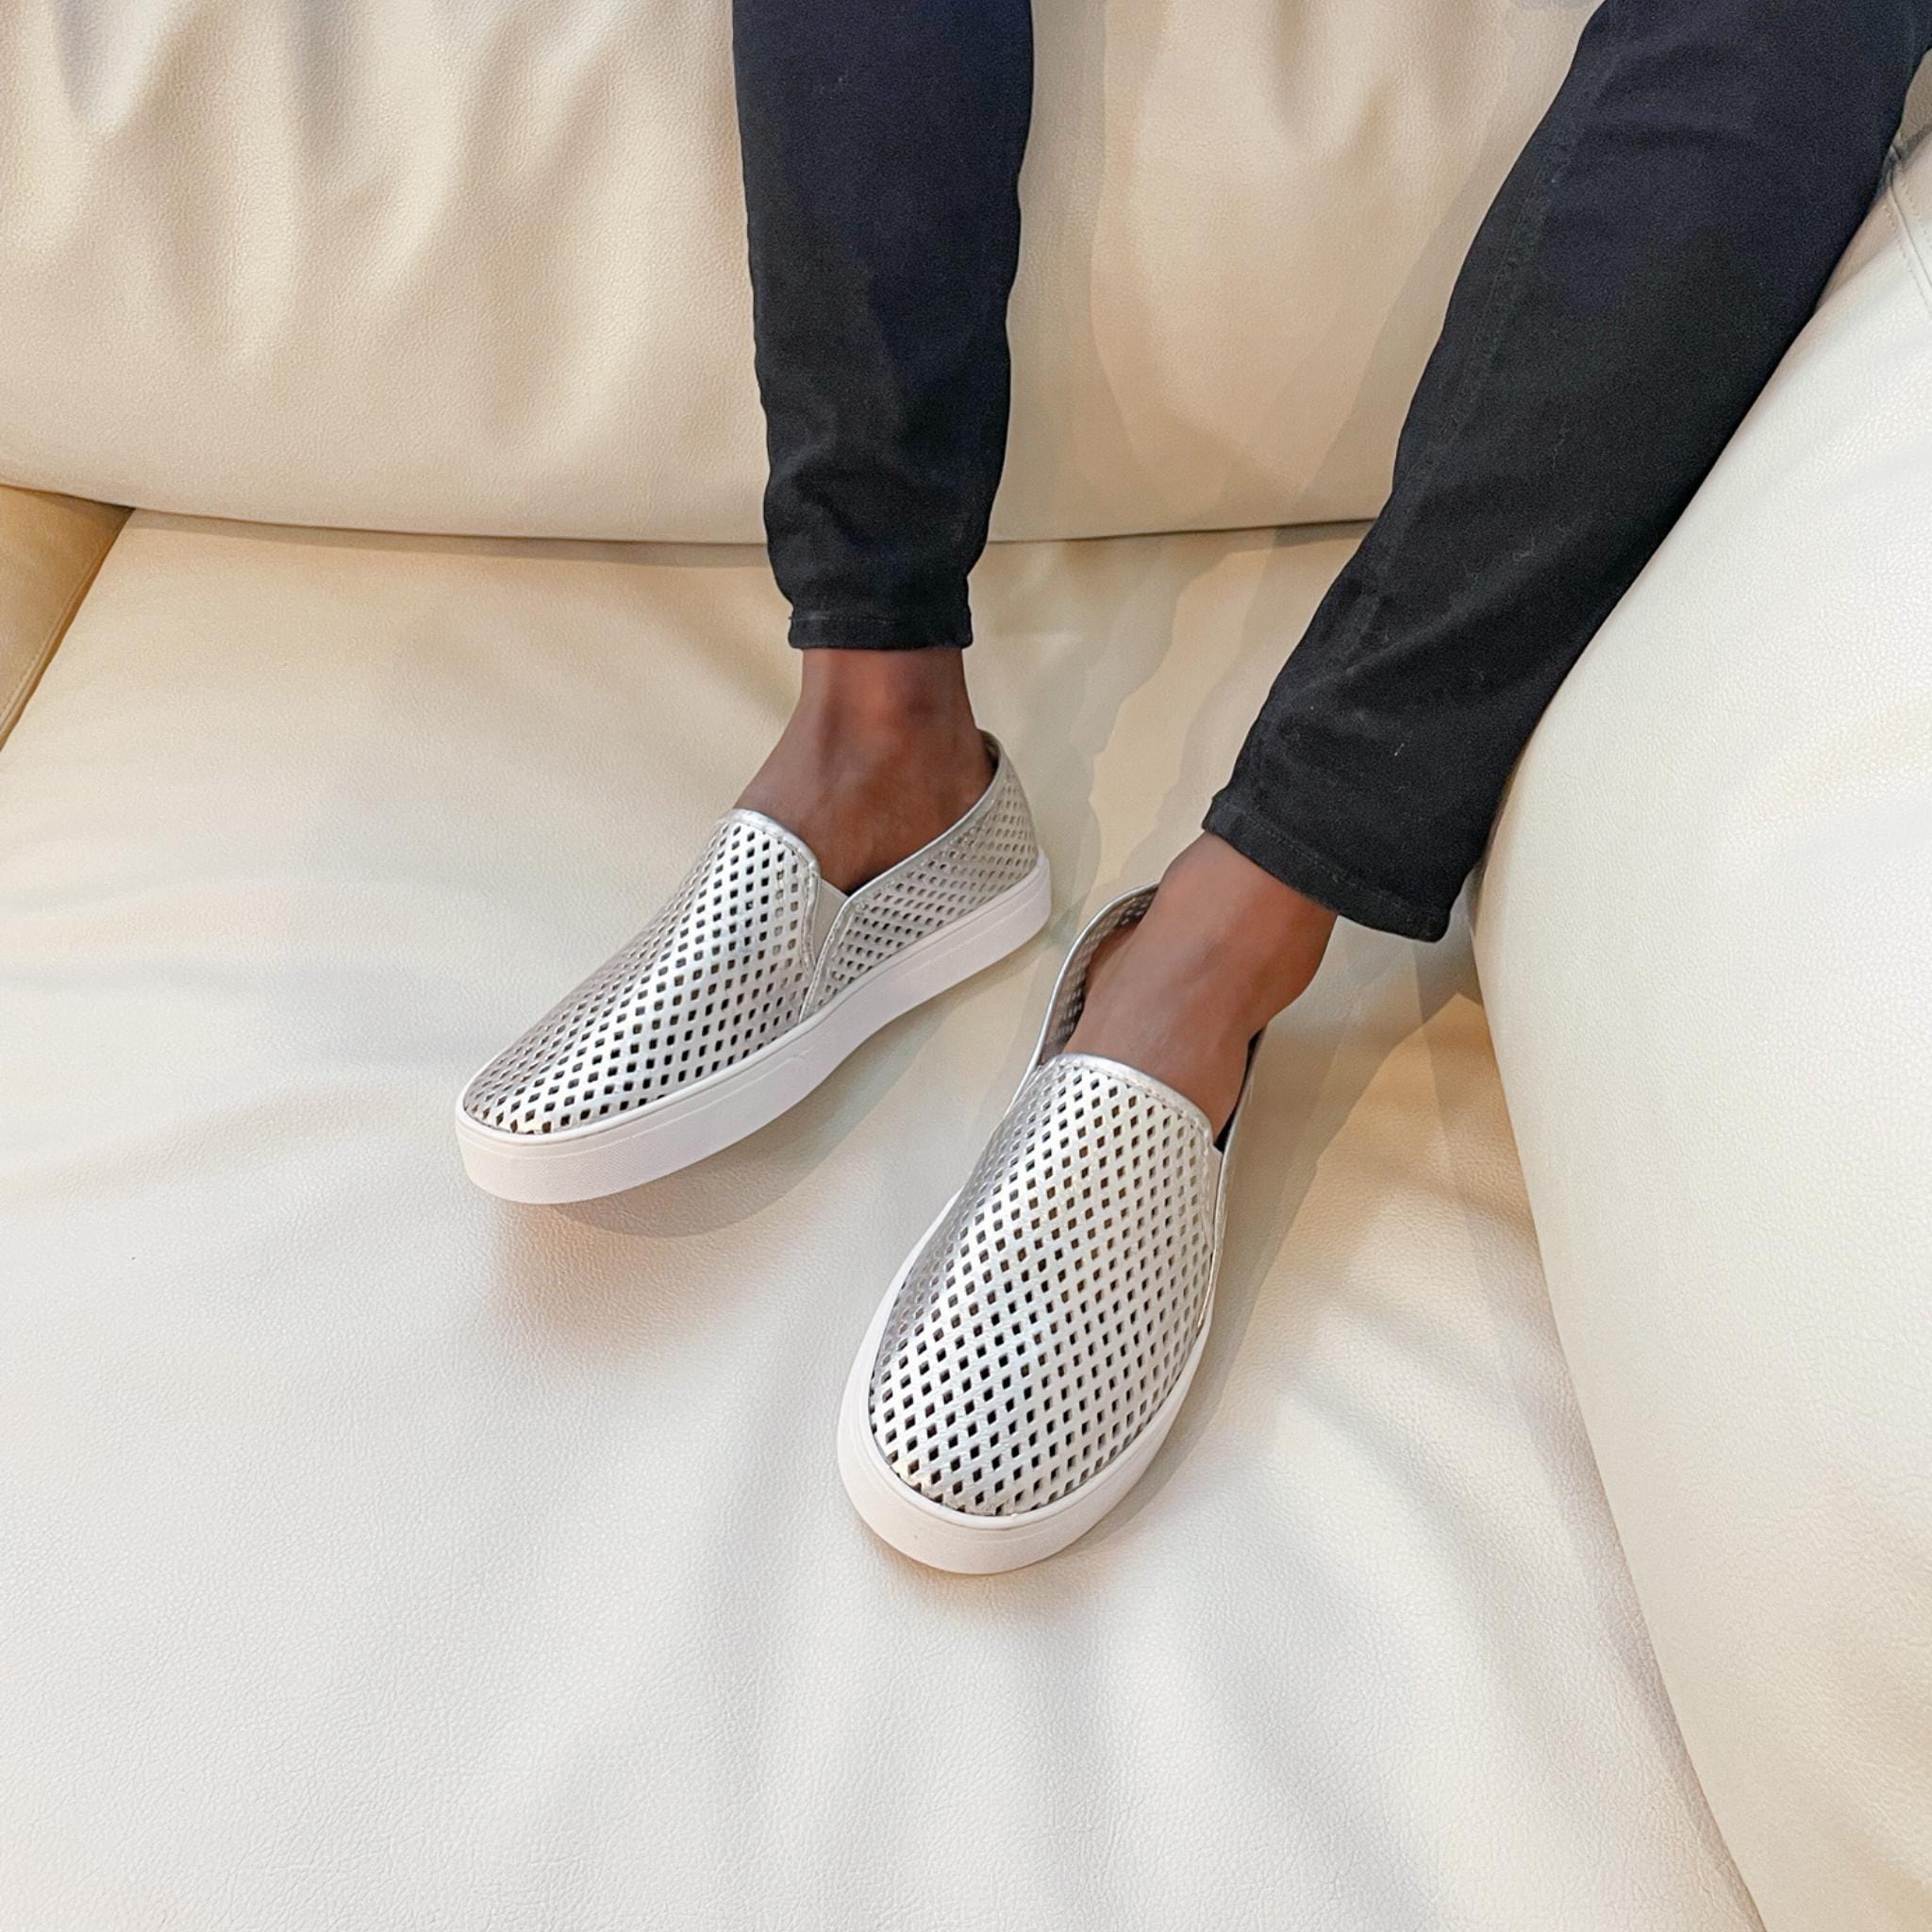 Jibs Classics Silver leather slip-on sneaker shoes sustainable Editorial